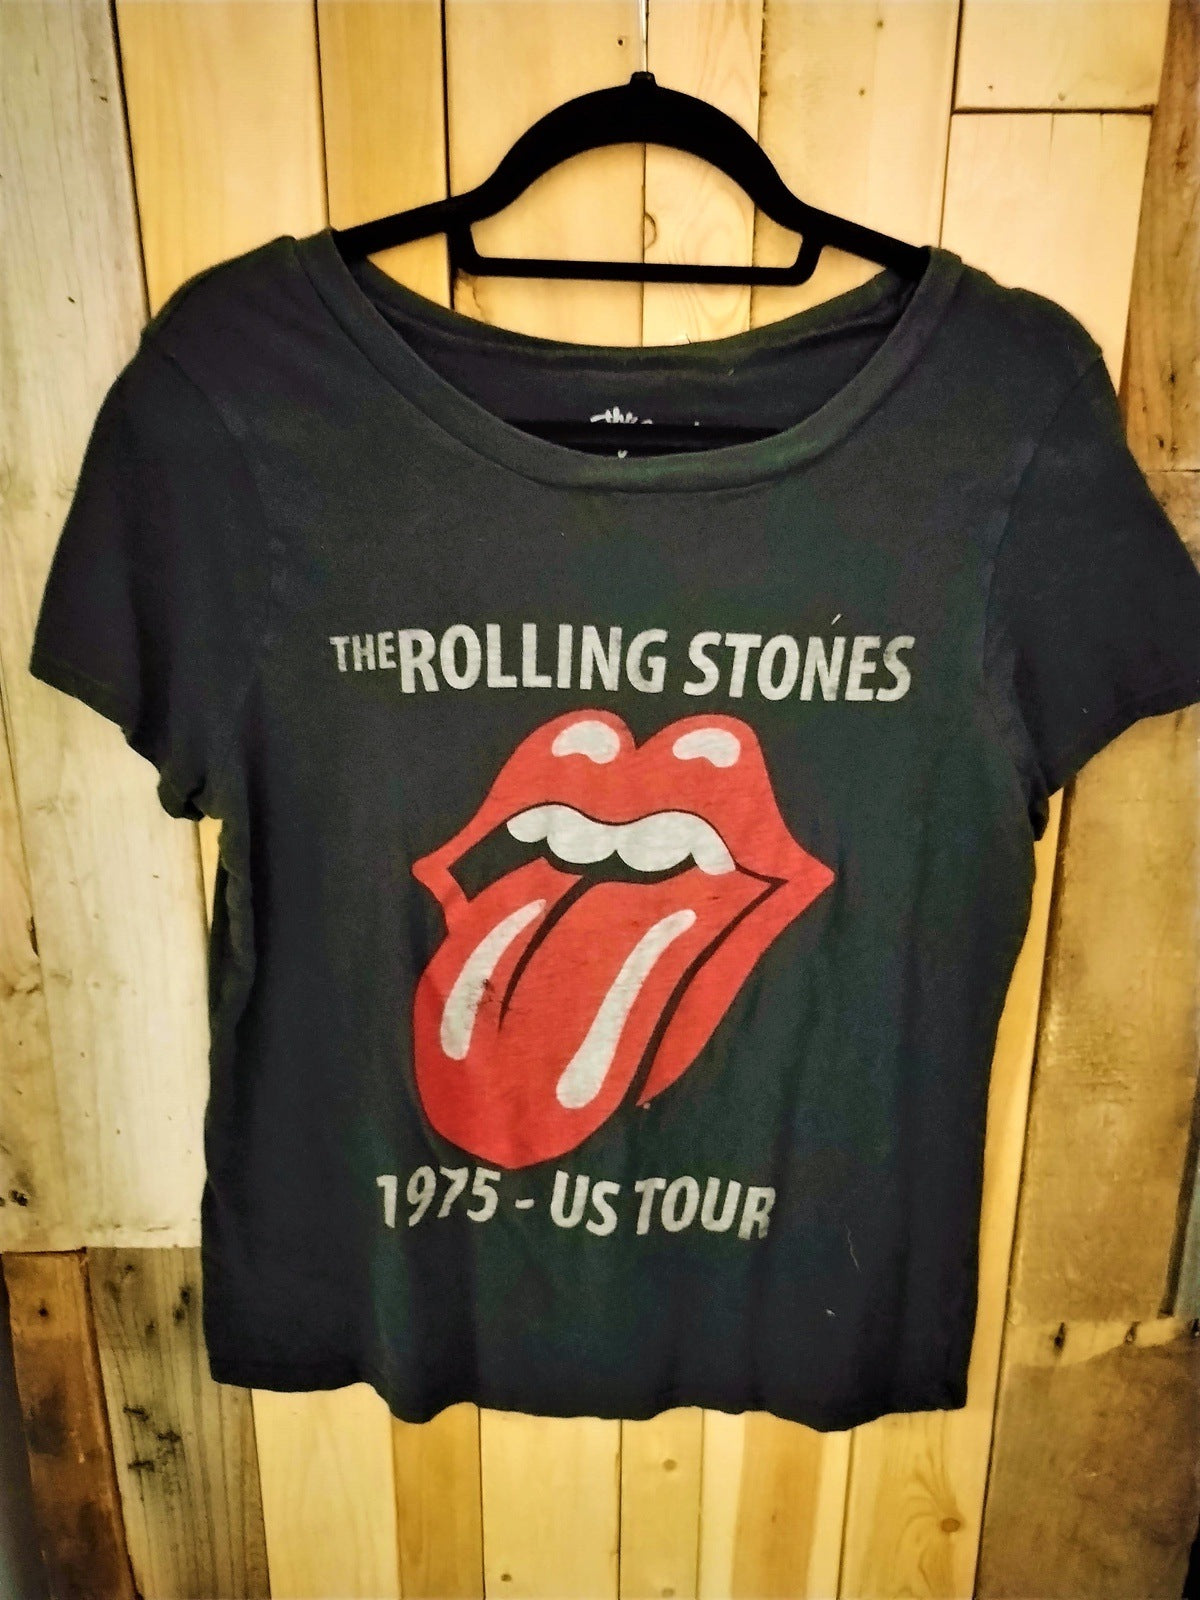 The Rolling Stones Tee Shirt Women's Size Large